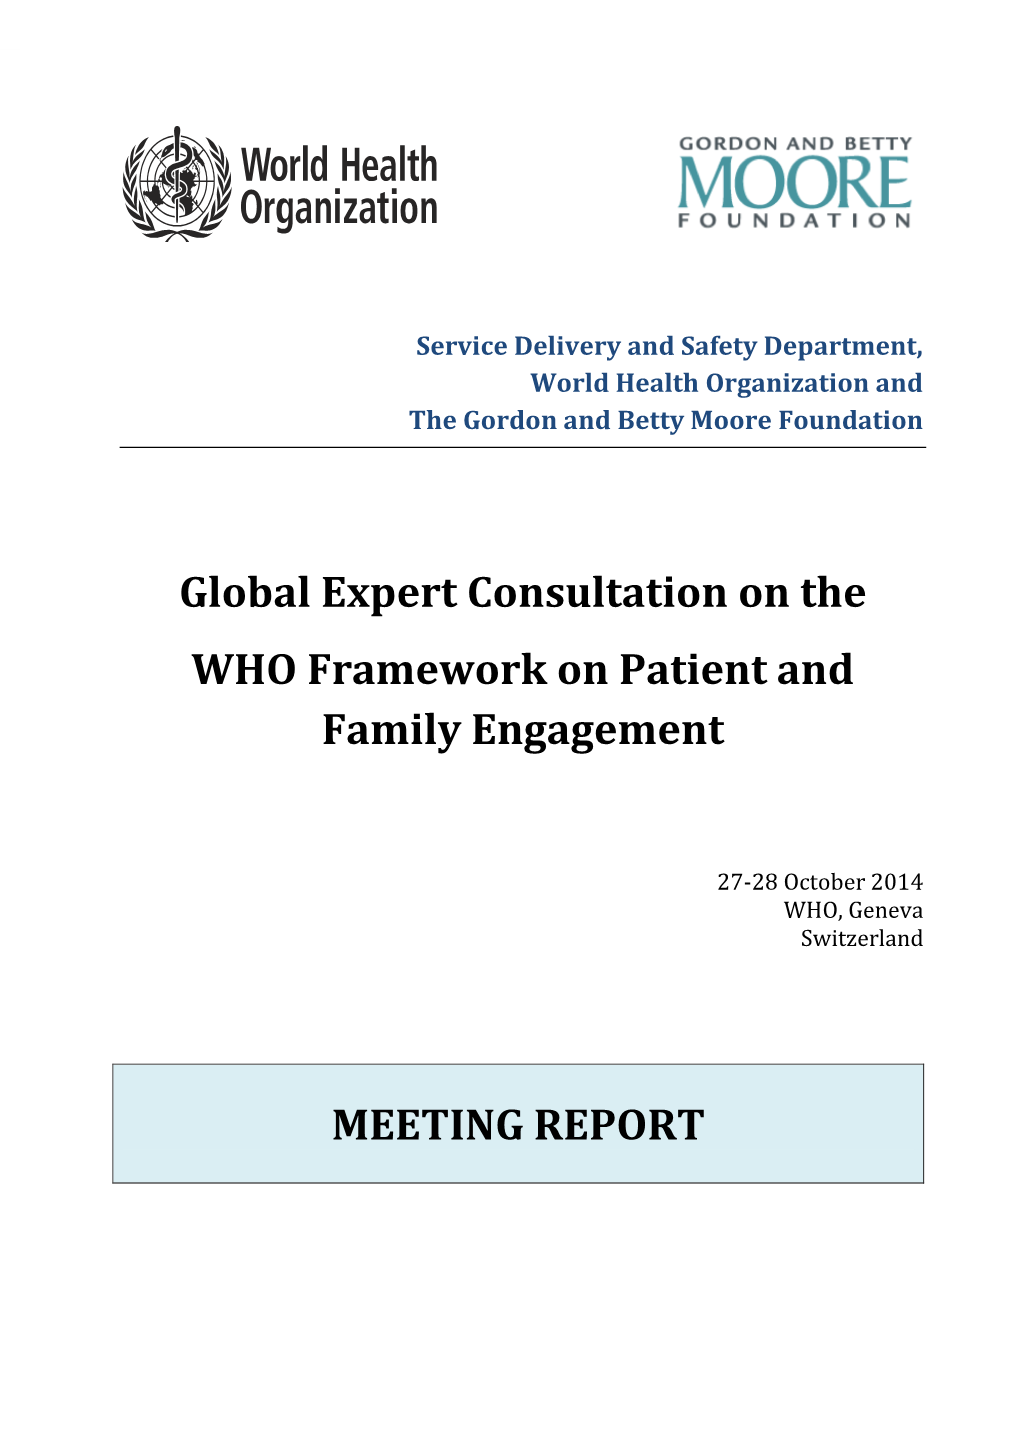 Global Expert Consultation on the WHO Framework on Patient And